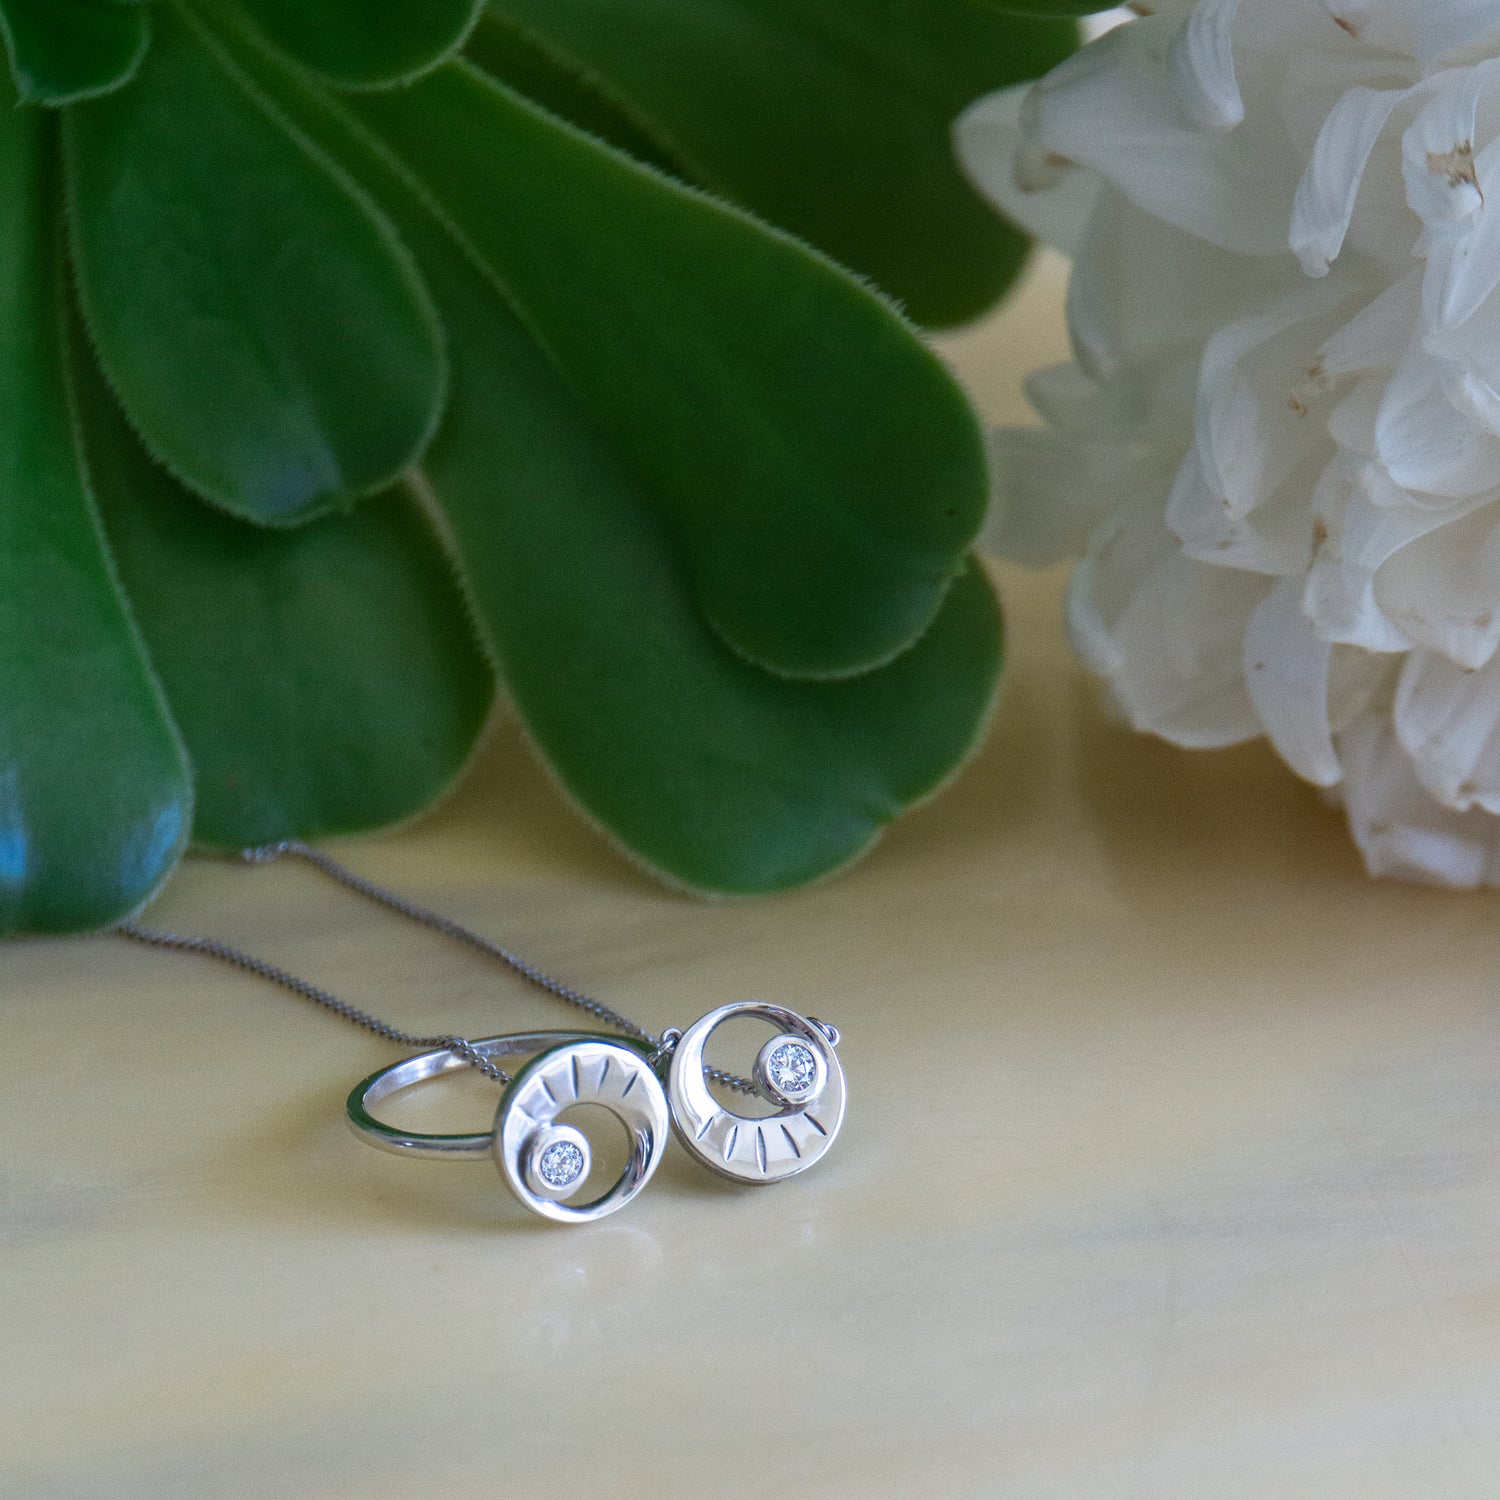 Eclipse Necklace - White Gold